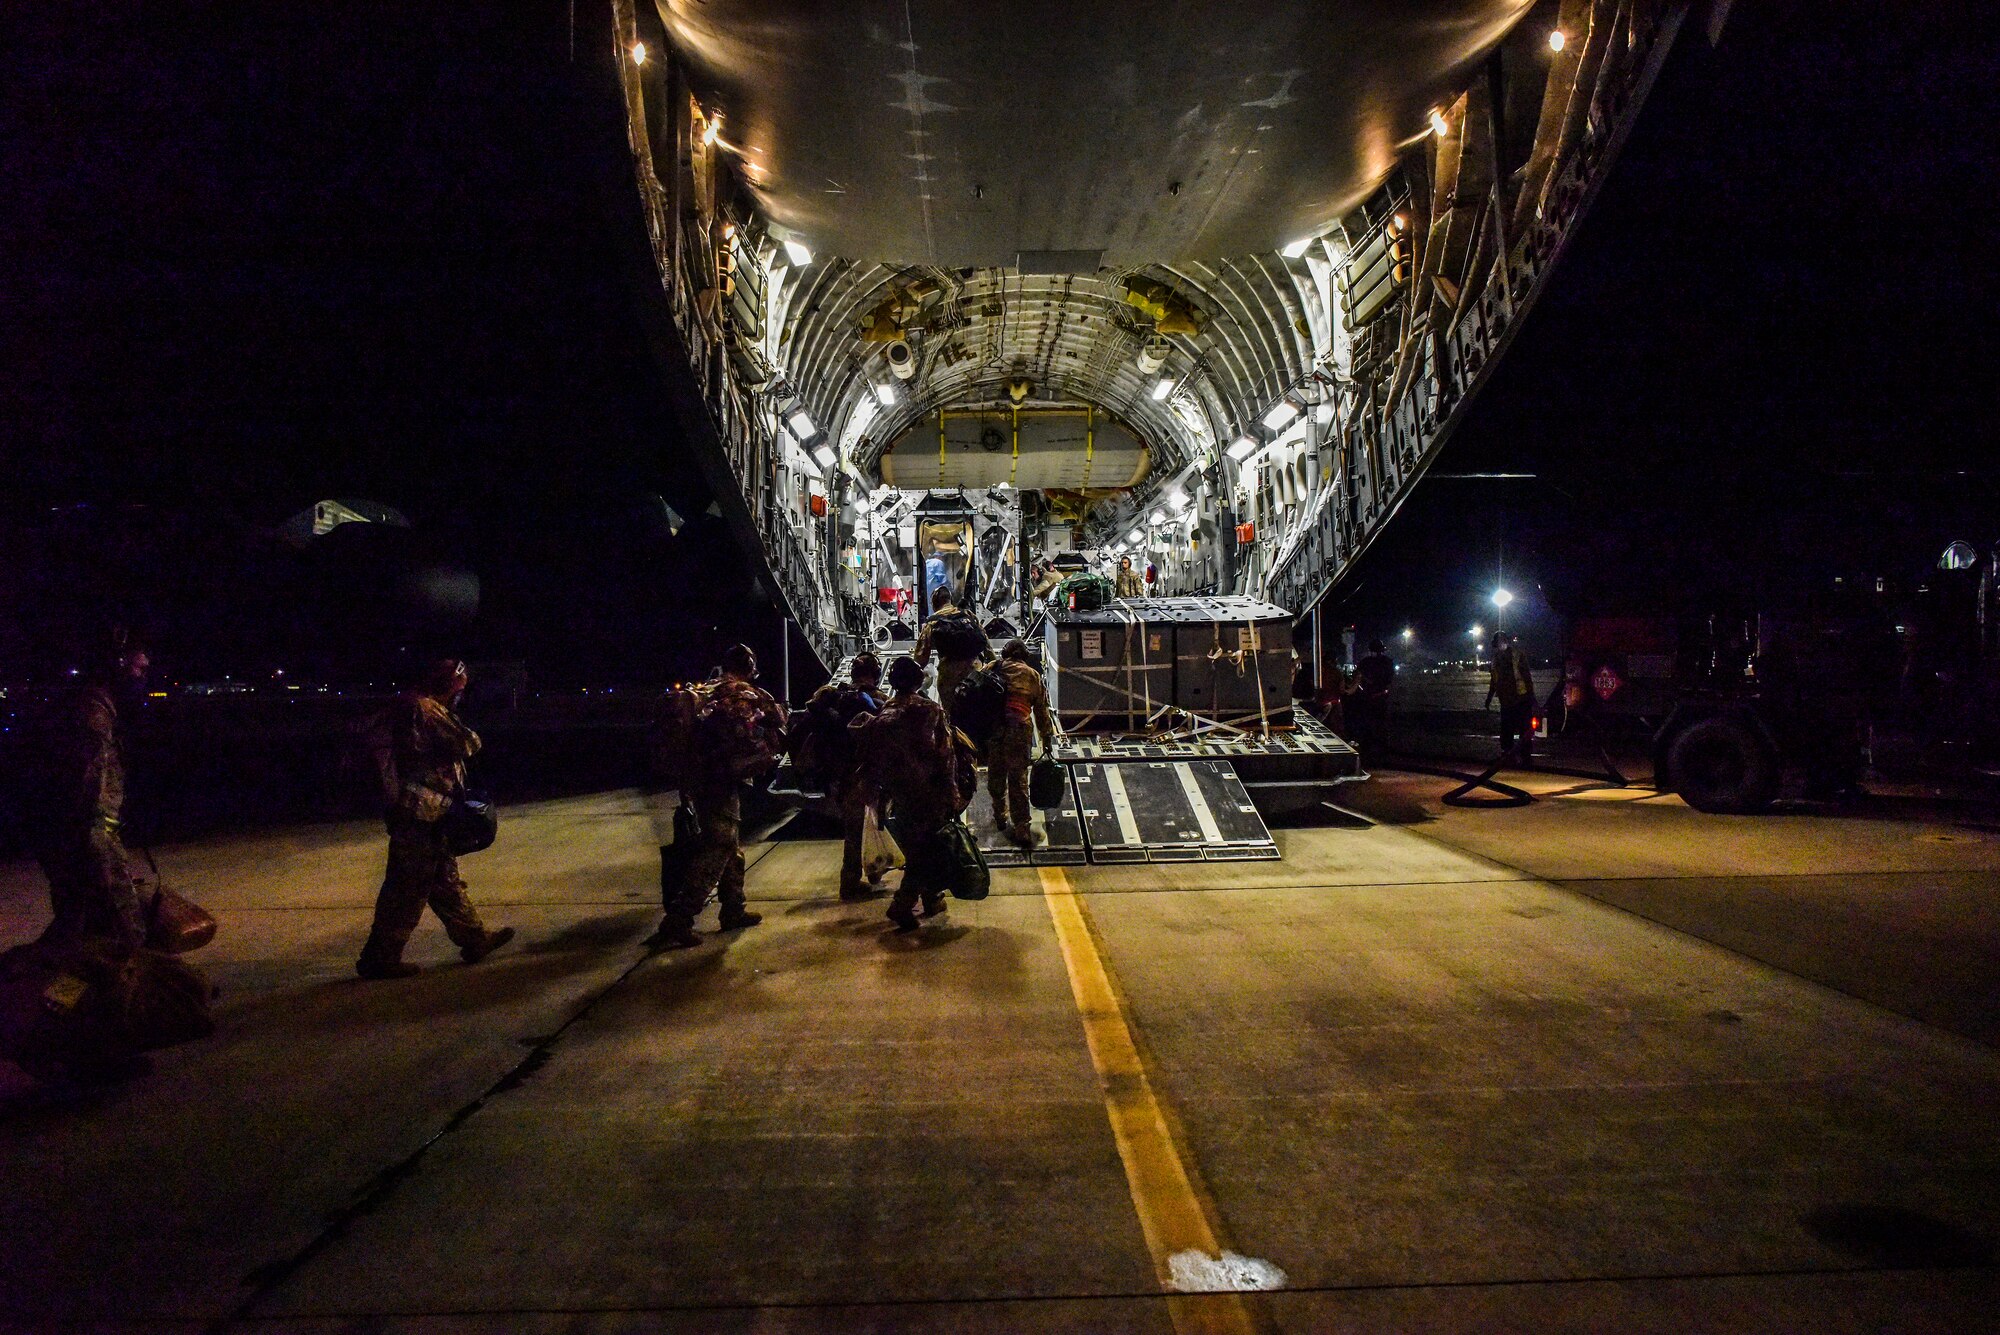 Airmen from the 60th Air Mobility Wing support a Transport Isolation System operation at Joint Base Pearl-Harbor Hickam, Hawaii, July 17, 2020. Several U.S. Air Force units came together to rapidly deploy the bio-containment capability for the first time in the Indo-Pacific theater in support of a COVID-19 aeromedical evacuation mission. The TIS is an infectious disease containment unit designed to minimize contamination risk to aircrew and medical attendants, while allowing in-flight medical care for patients afflicted by a disease. (U.S. Air Force photo by Tech. Sgt. Anthony Nelson Jr.)